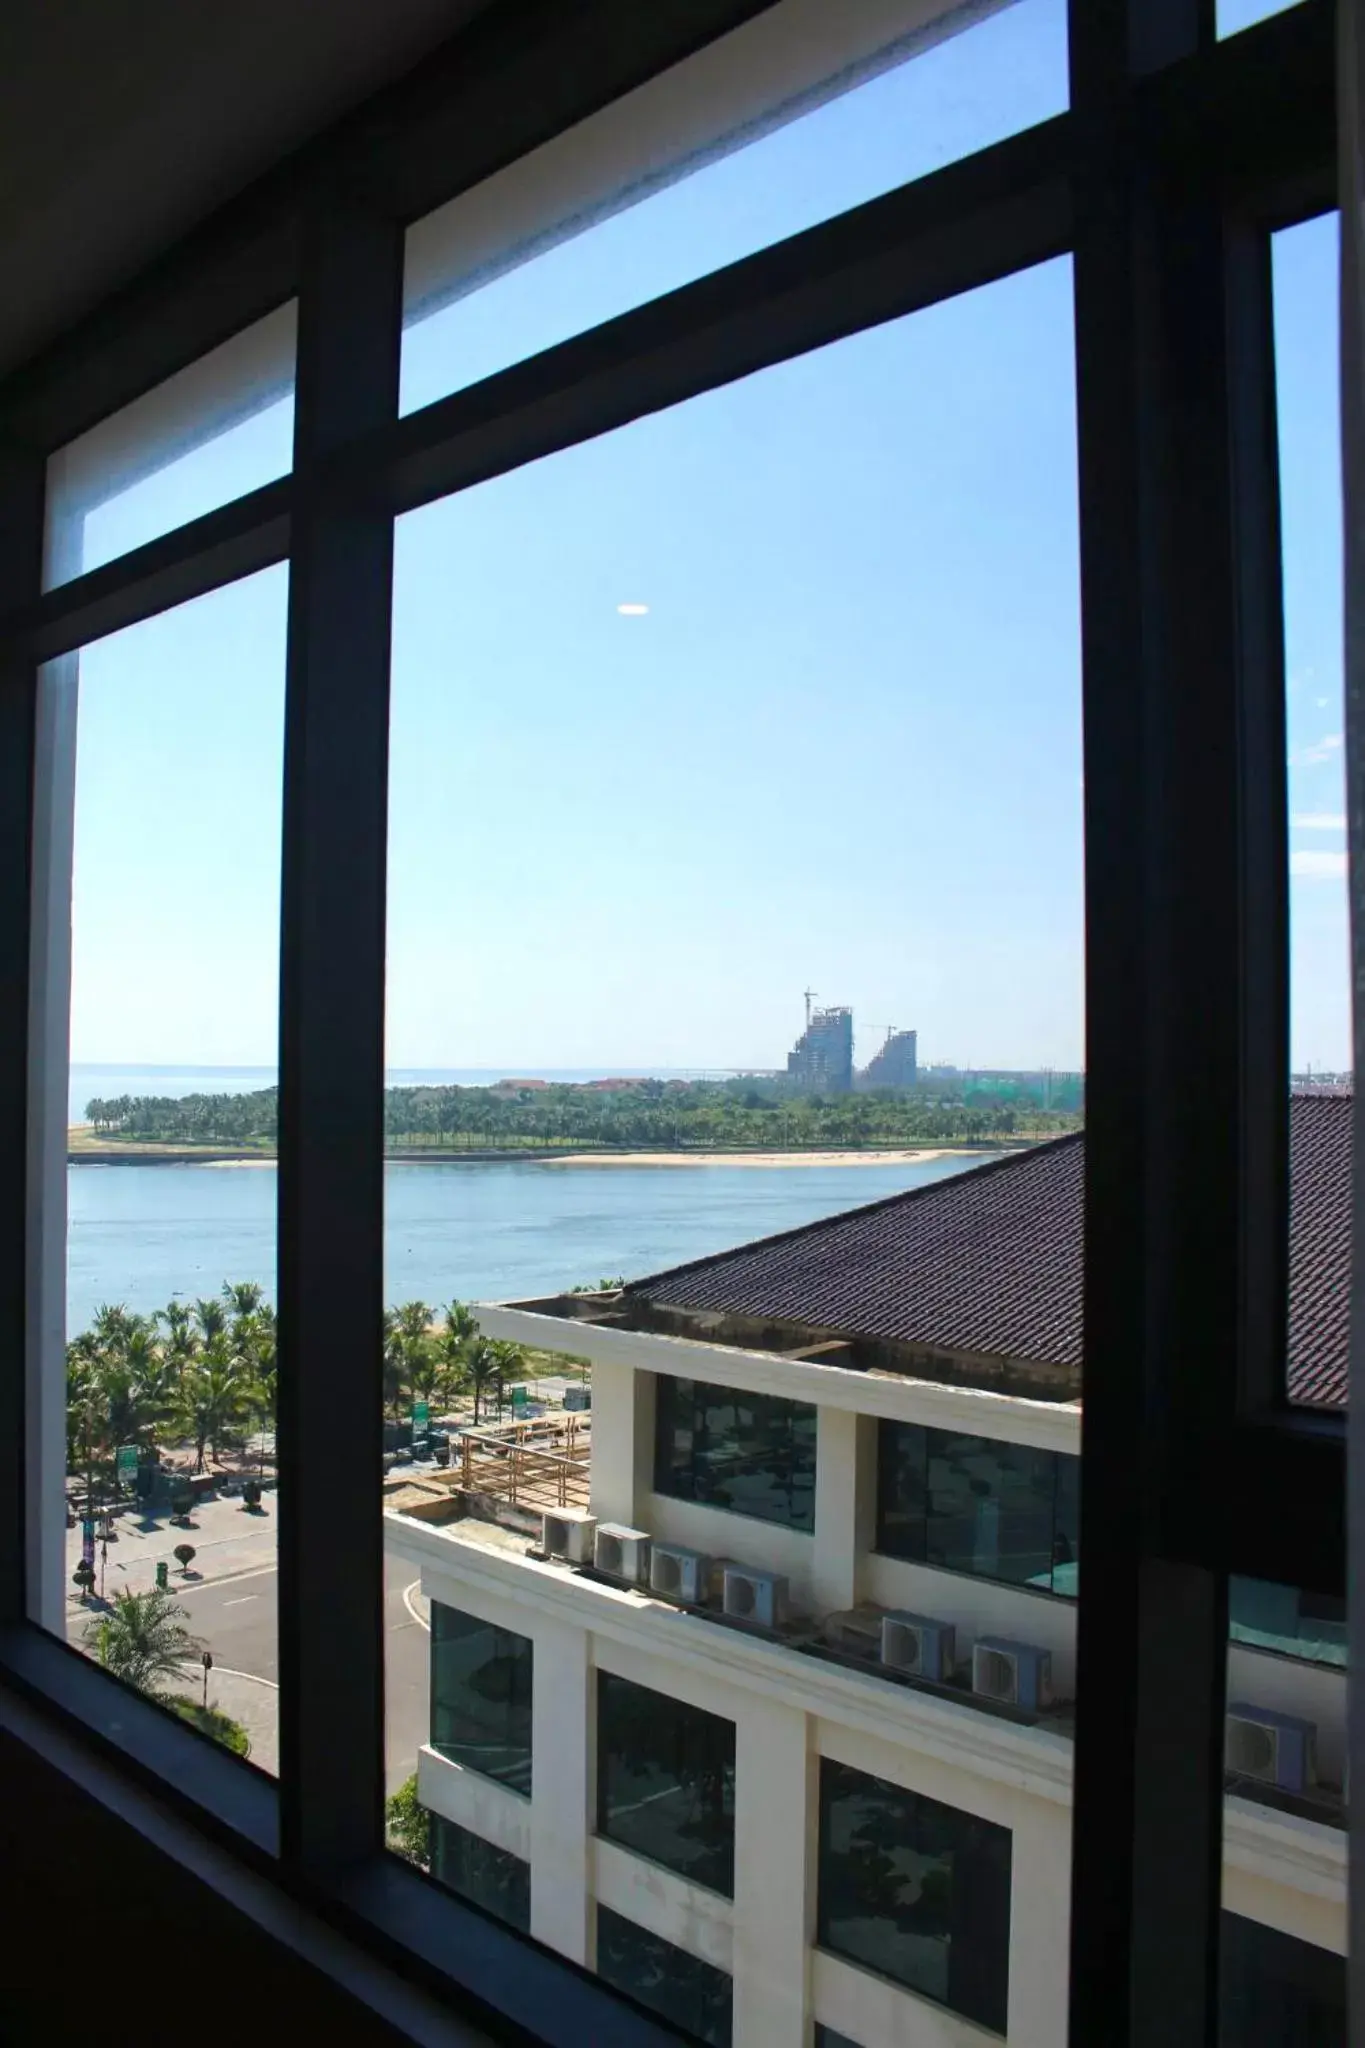 Sea view in Muong Thanh Luxury Nhat Le Hotel